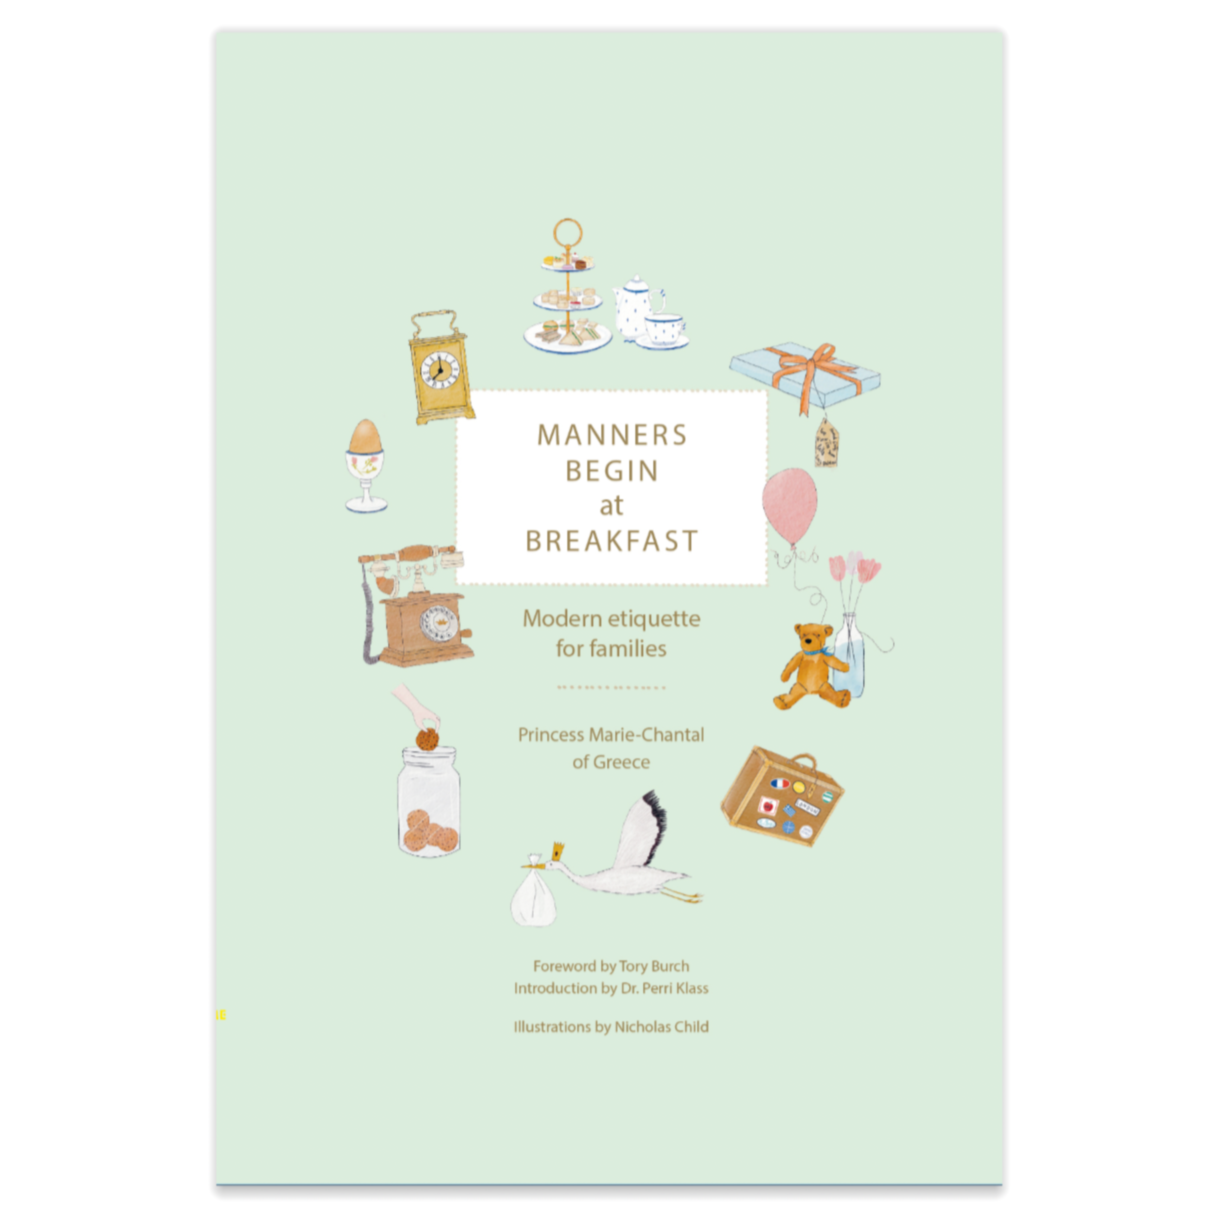 Manners Begin at Breakfast, Revised and Updated Edition - Signature Edition